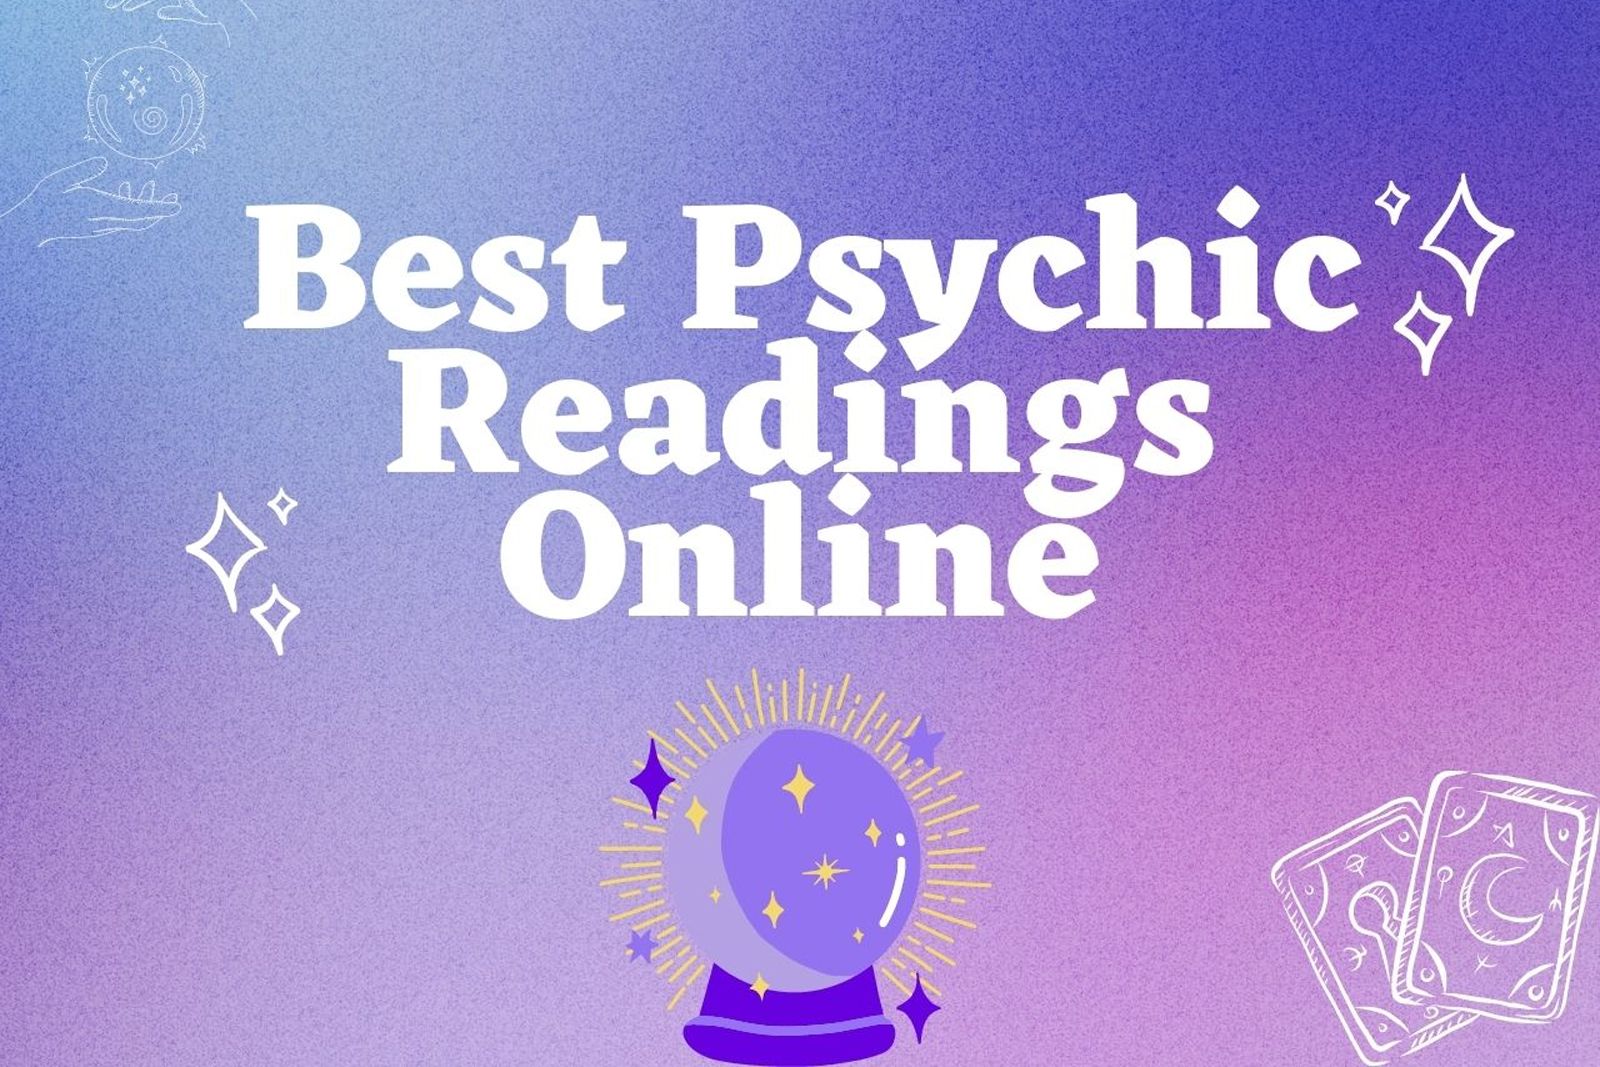 Top psychic readings online in 2022: Top 5 best psychic reading sites photo 1